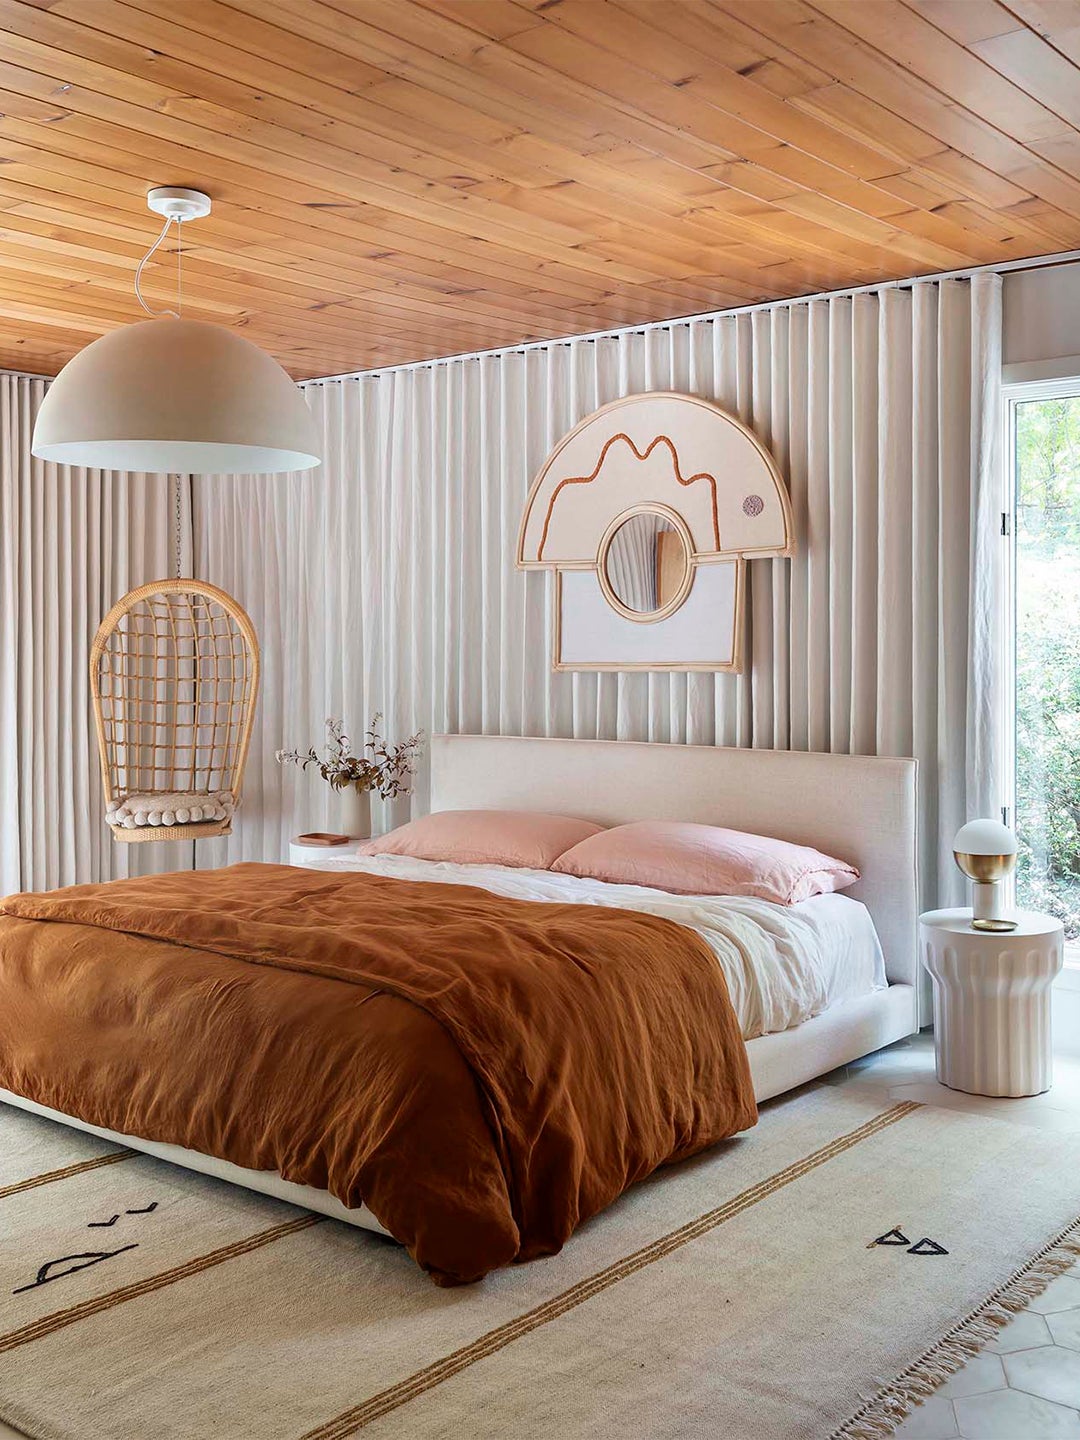 pink and orange bed with modern wood ceiling and gray drapes